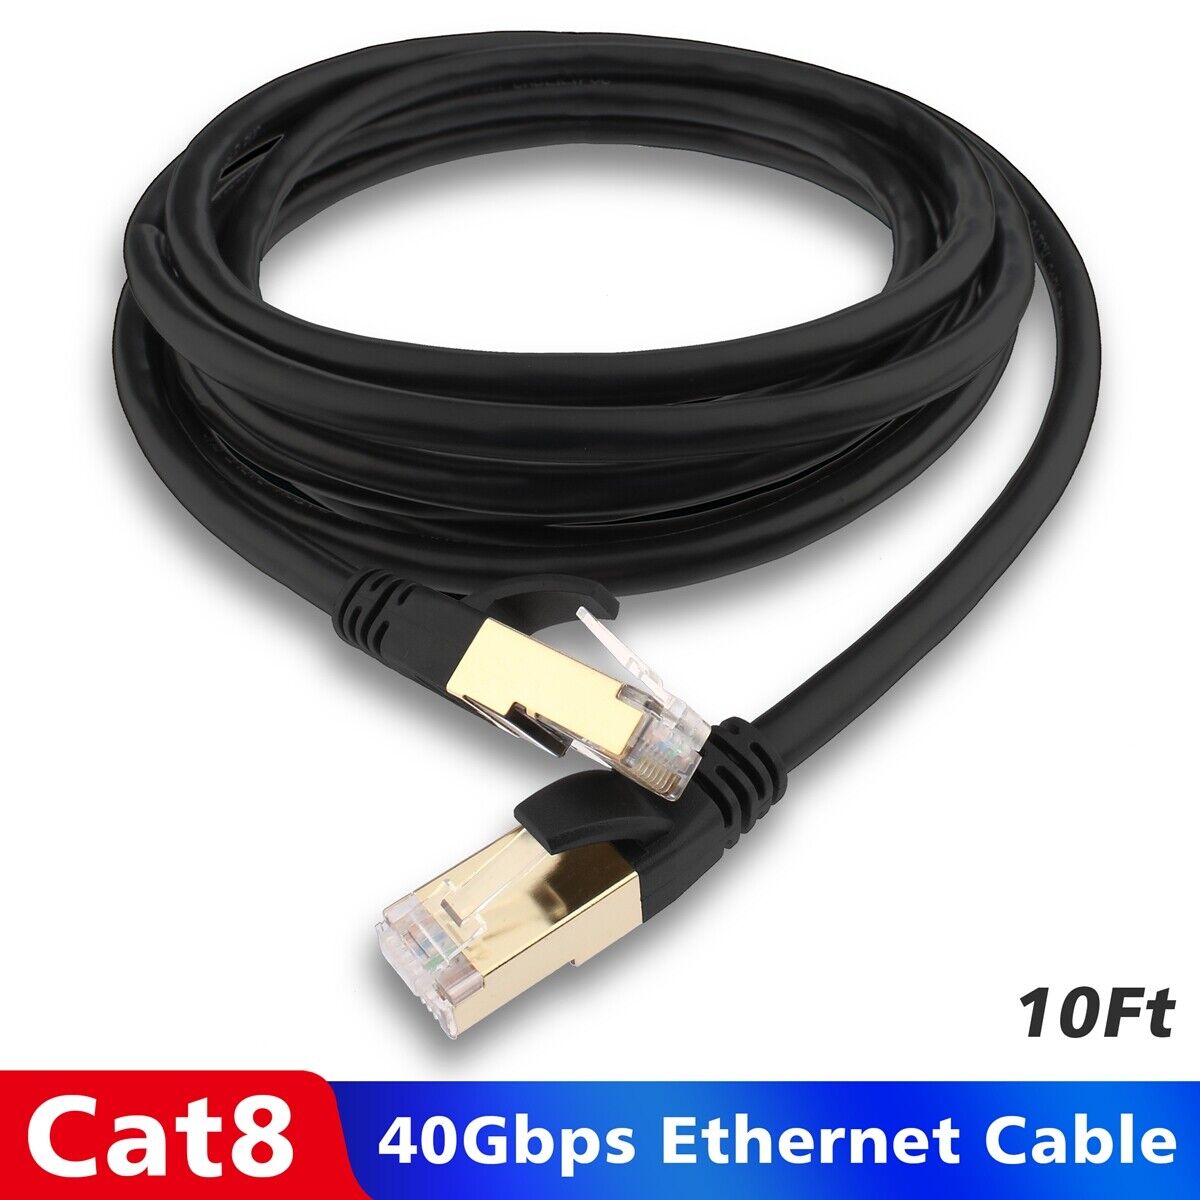 Cat 8 Ethernet, Patch & Network Cable - 10FT - for Max Internet Speed, STP 26AWG